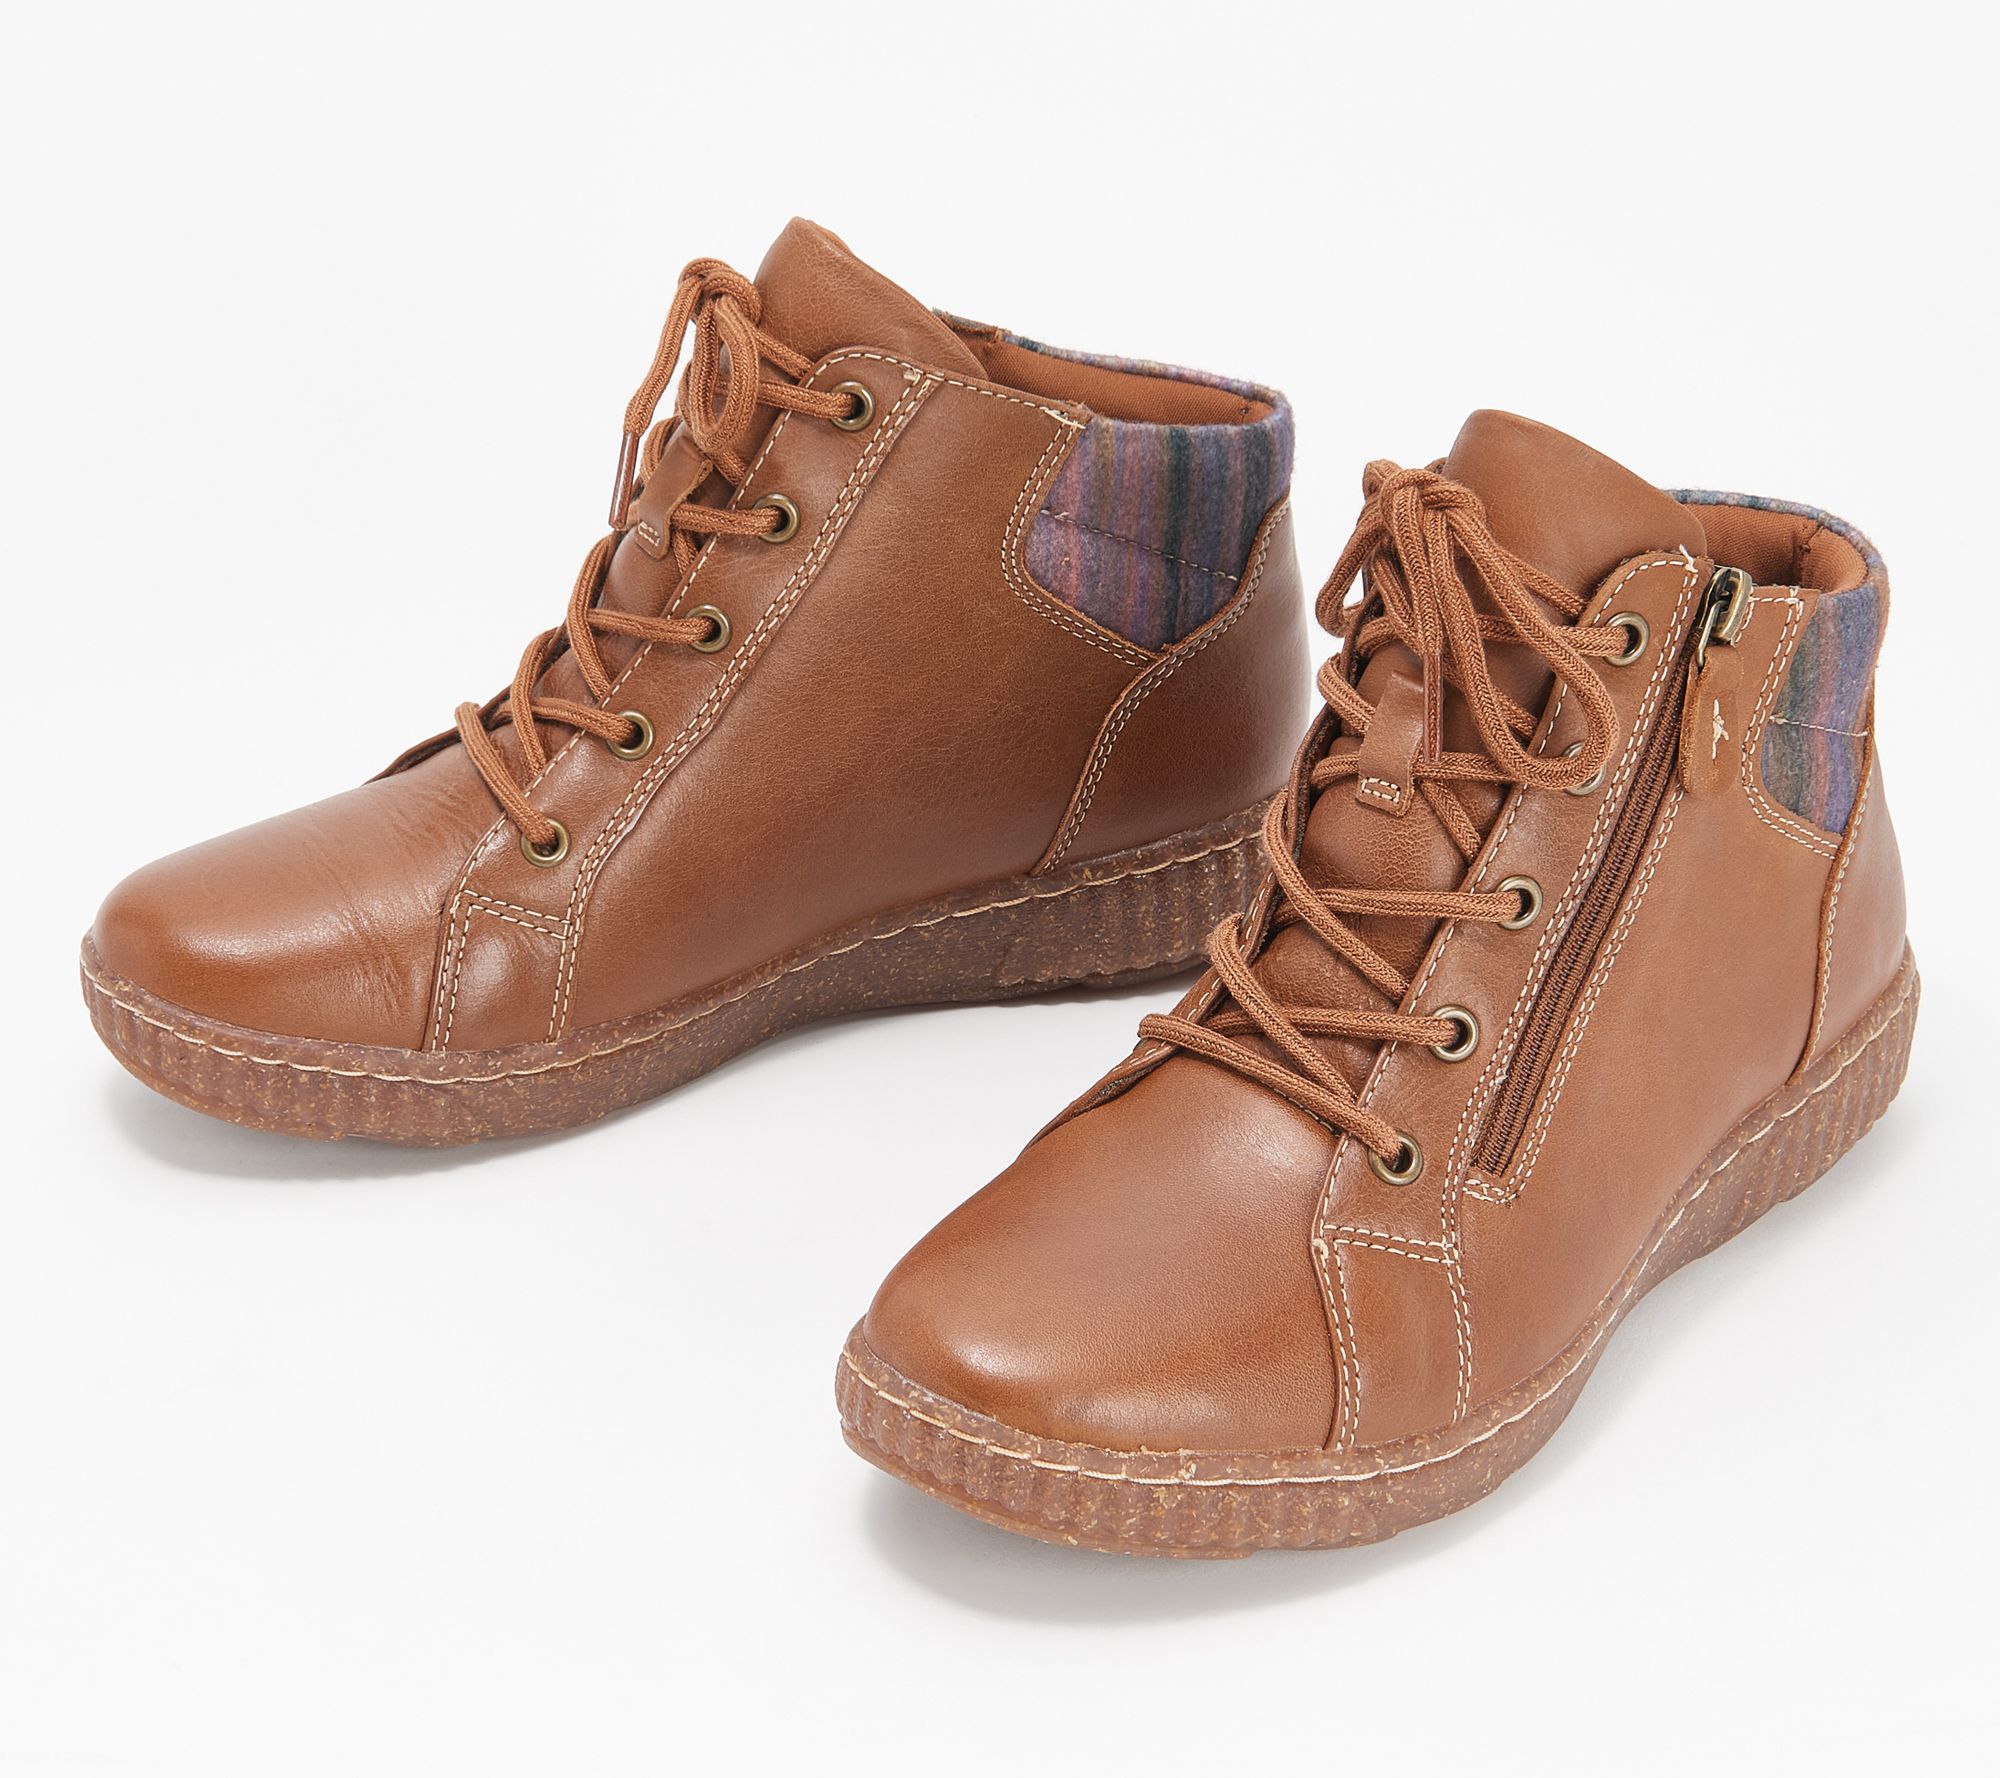 As Is" Clarks Collection Leather Lace-Up Ankle Boots- QVC.com